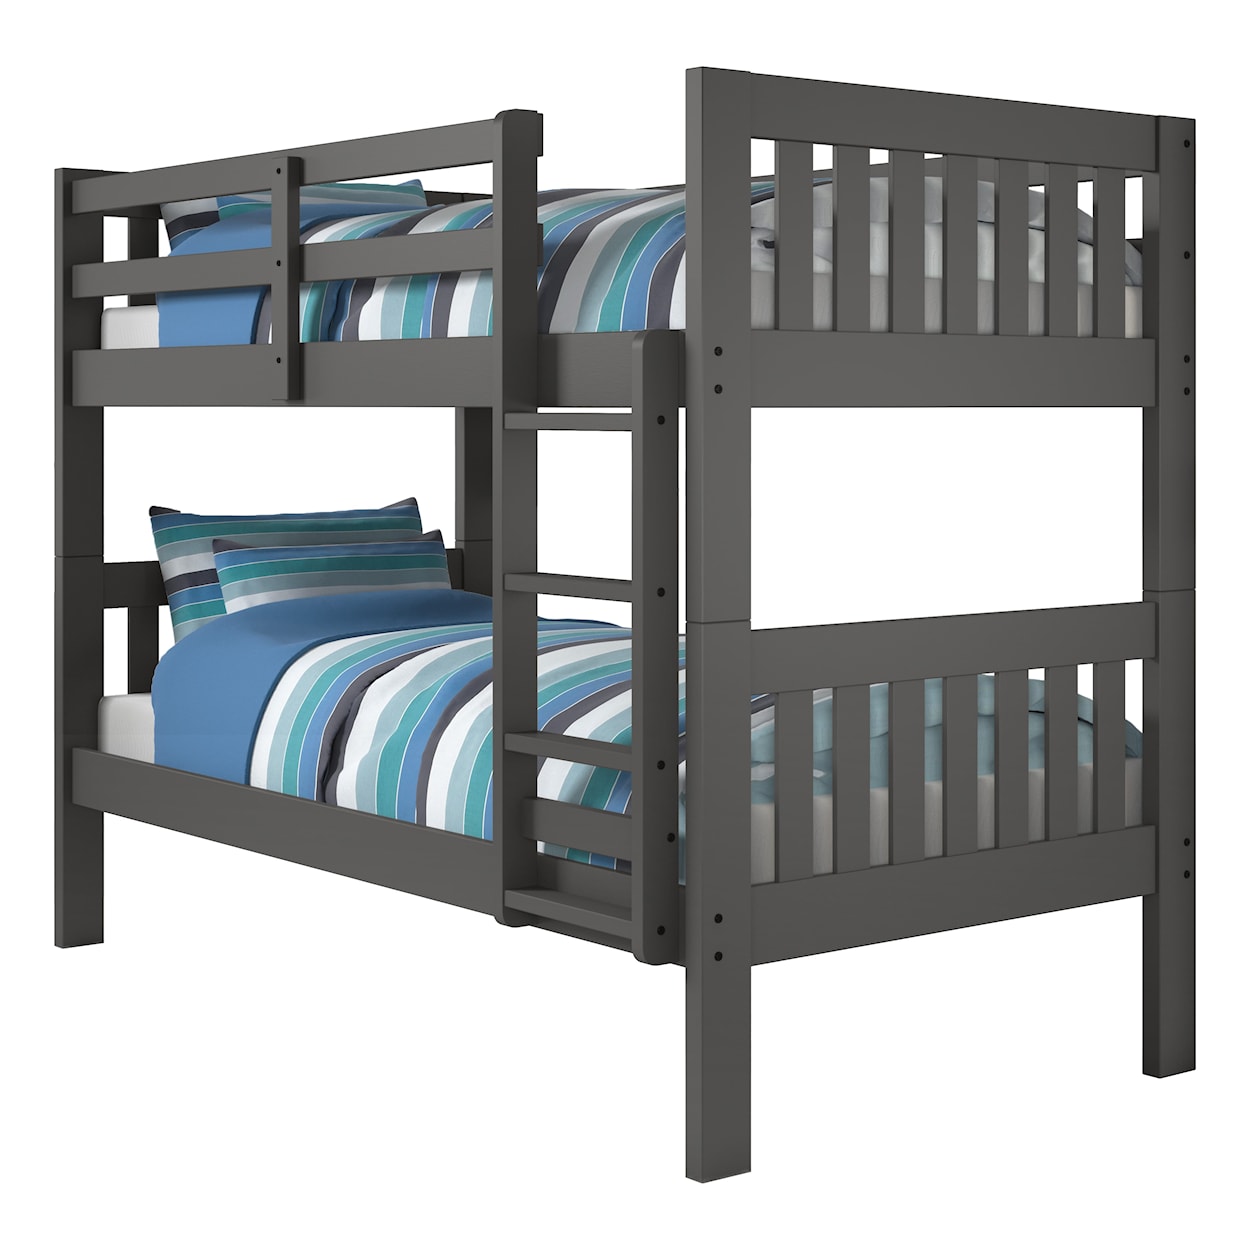 Sam's Furniture Bunk Bed Packages Donco 1010 Twin/Twin Bunkbed with Mattress 